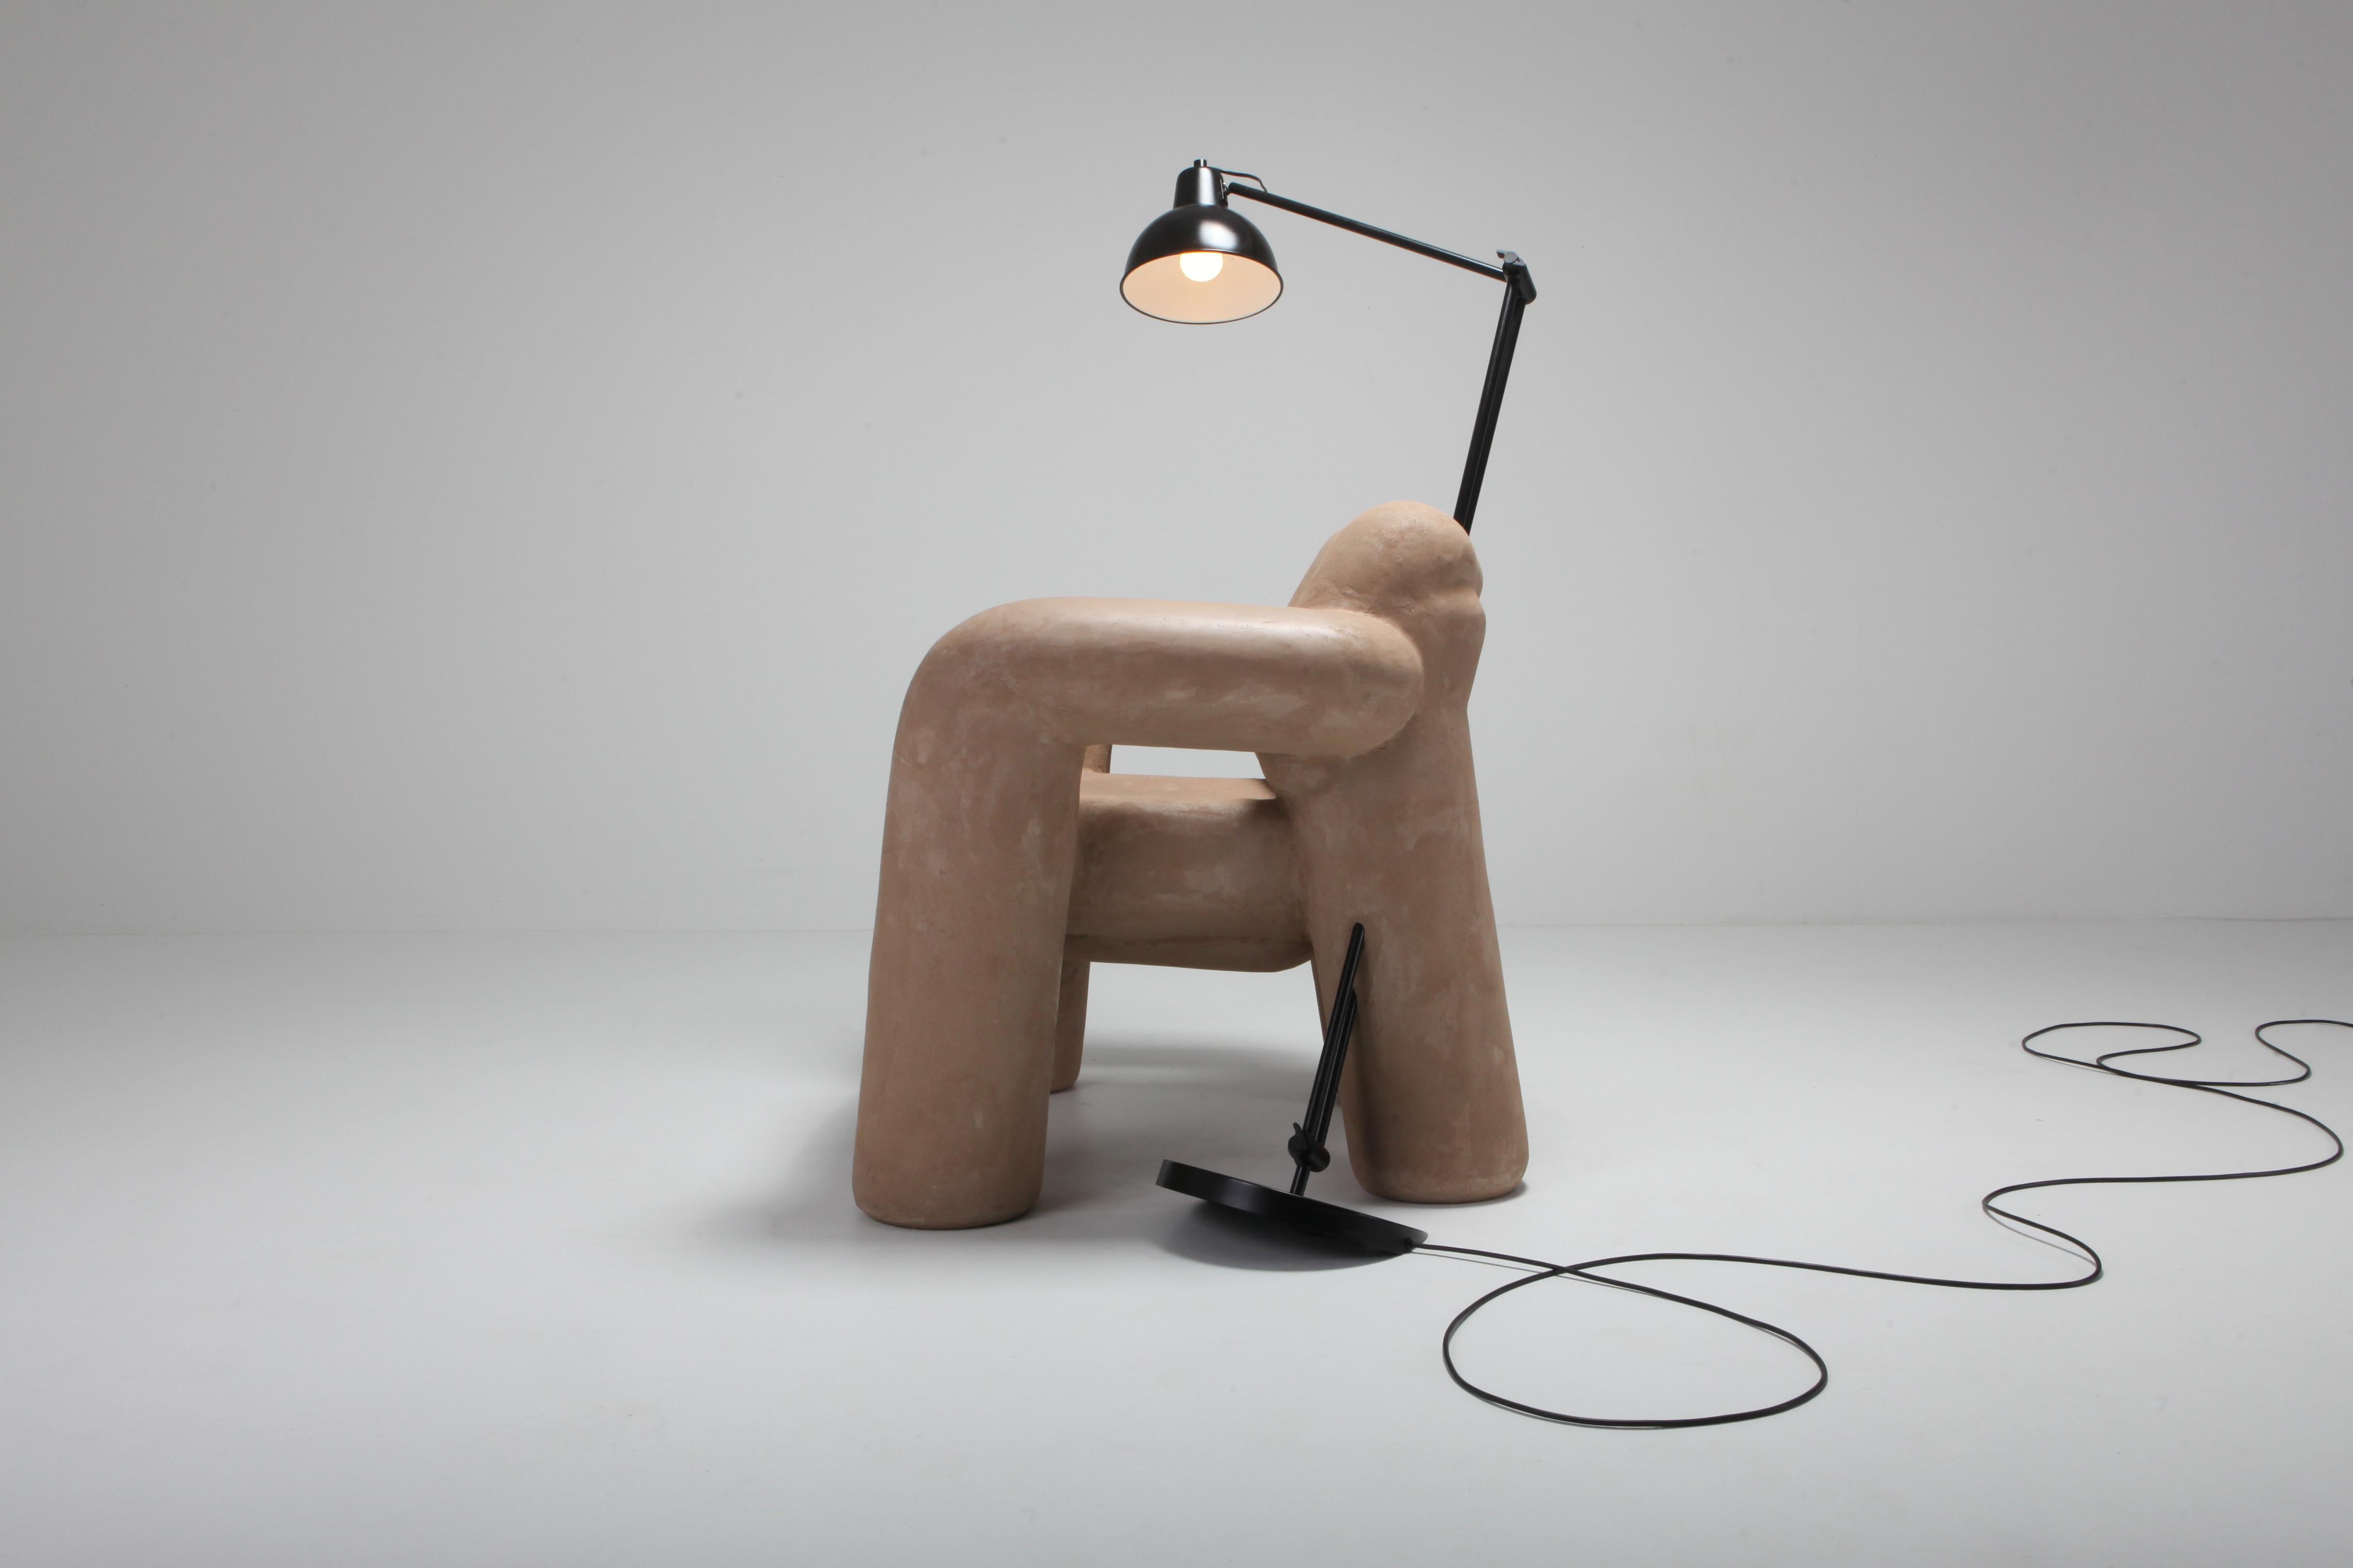 European 'Blown-Up with Lamp' by Schimmel & Schweikle in Vegan Leather Coating